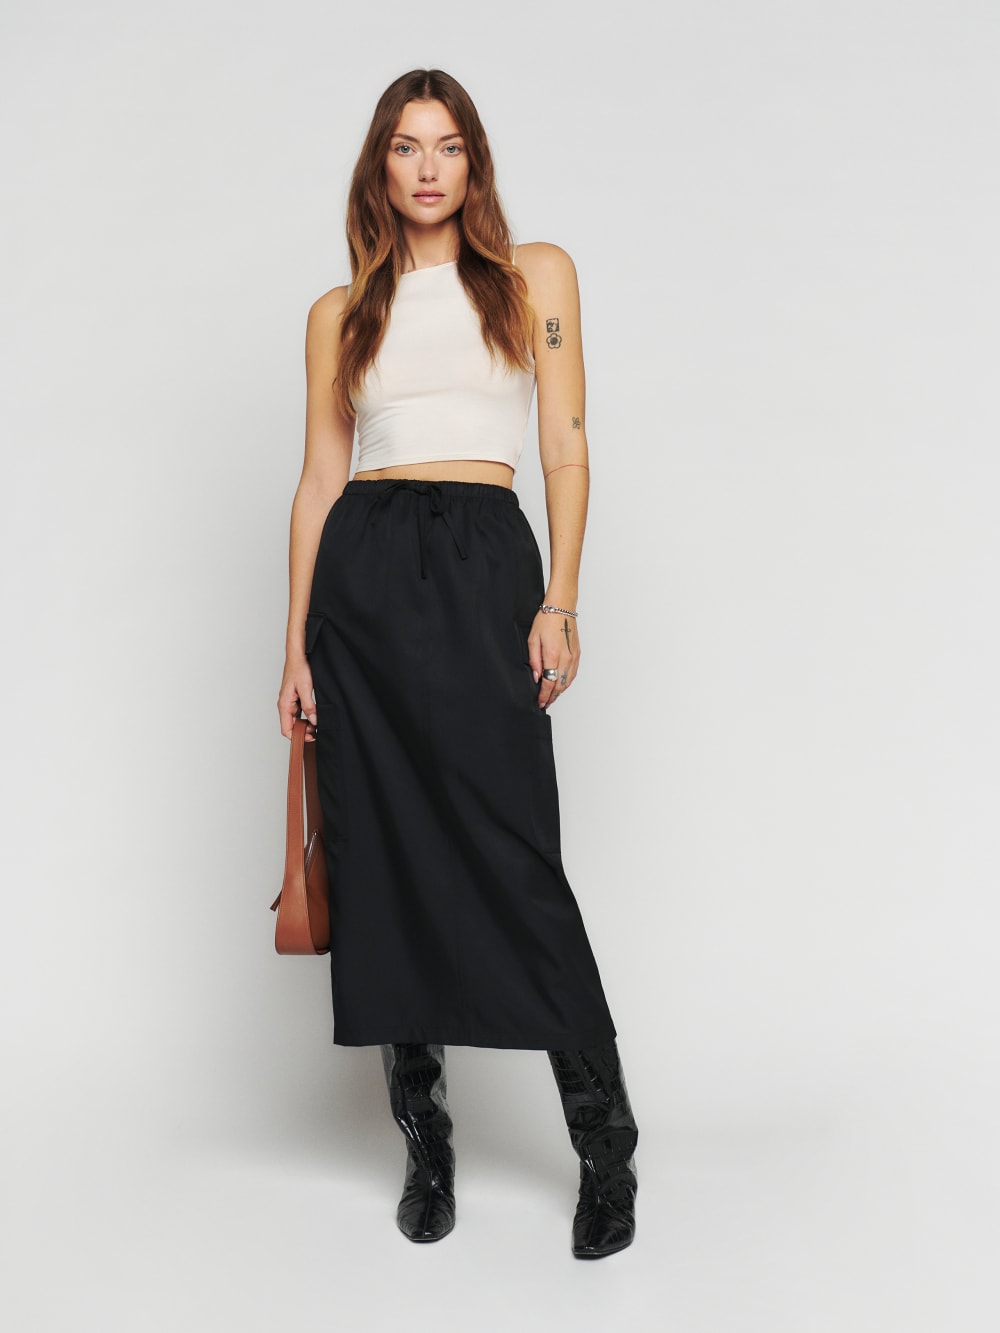 Reformation Ethan cargo midi skirt in black has Cargo pockets, a Drawstring at the waist and a Relaxed fit with cargo pockets on the side. 